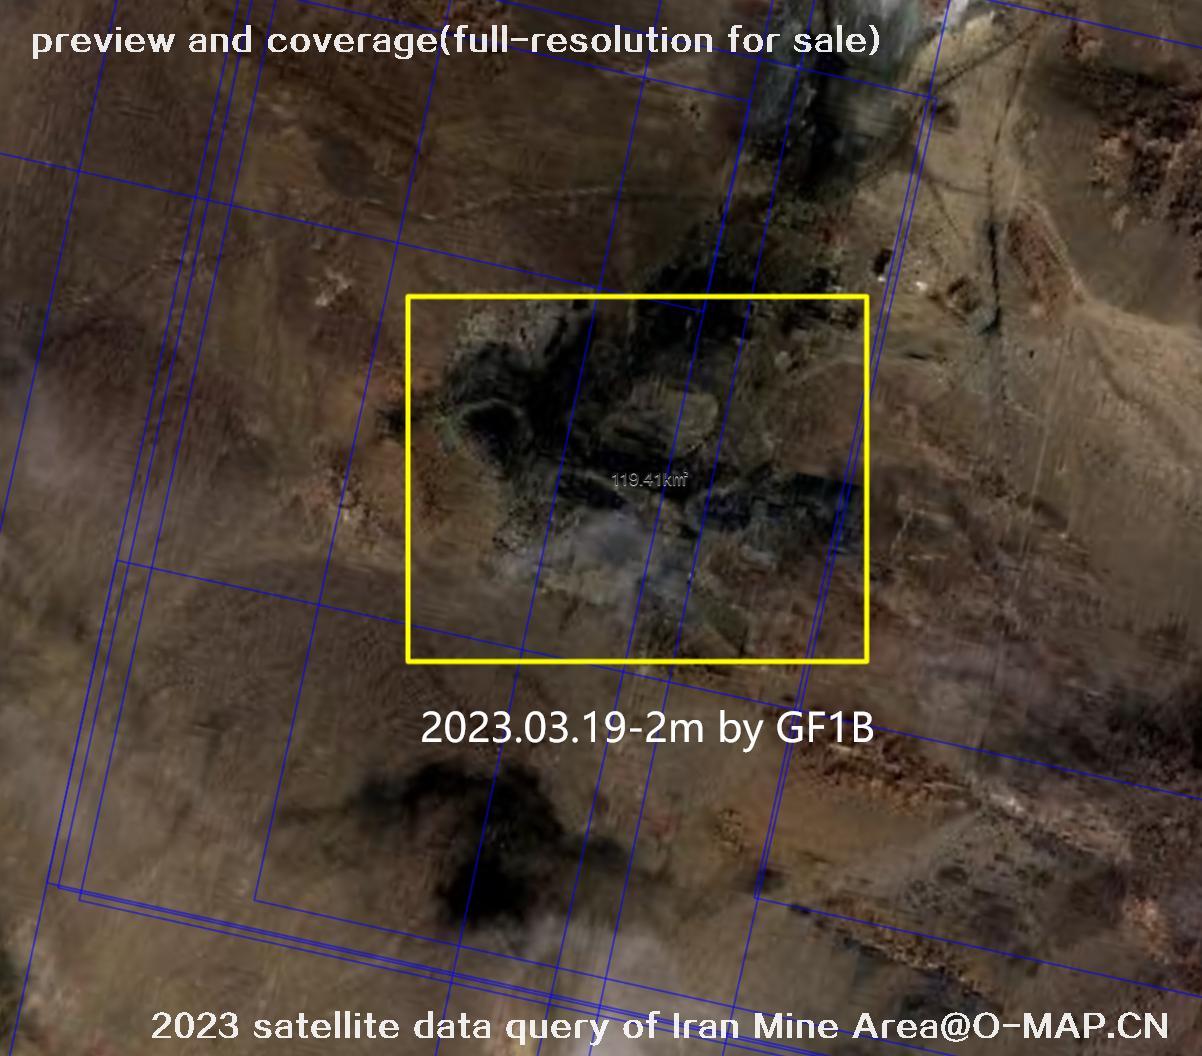 The 2023 satellite data query results of Iran Mine Area